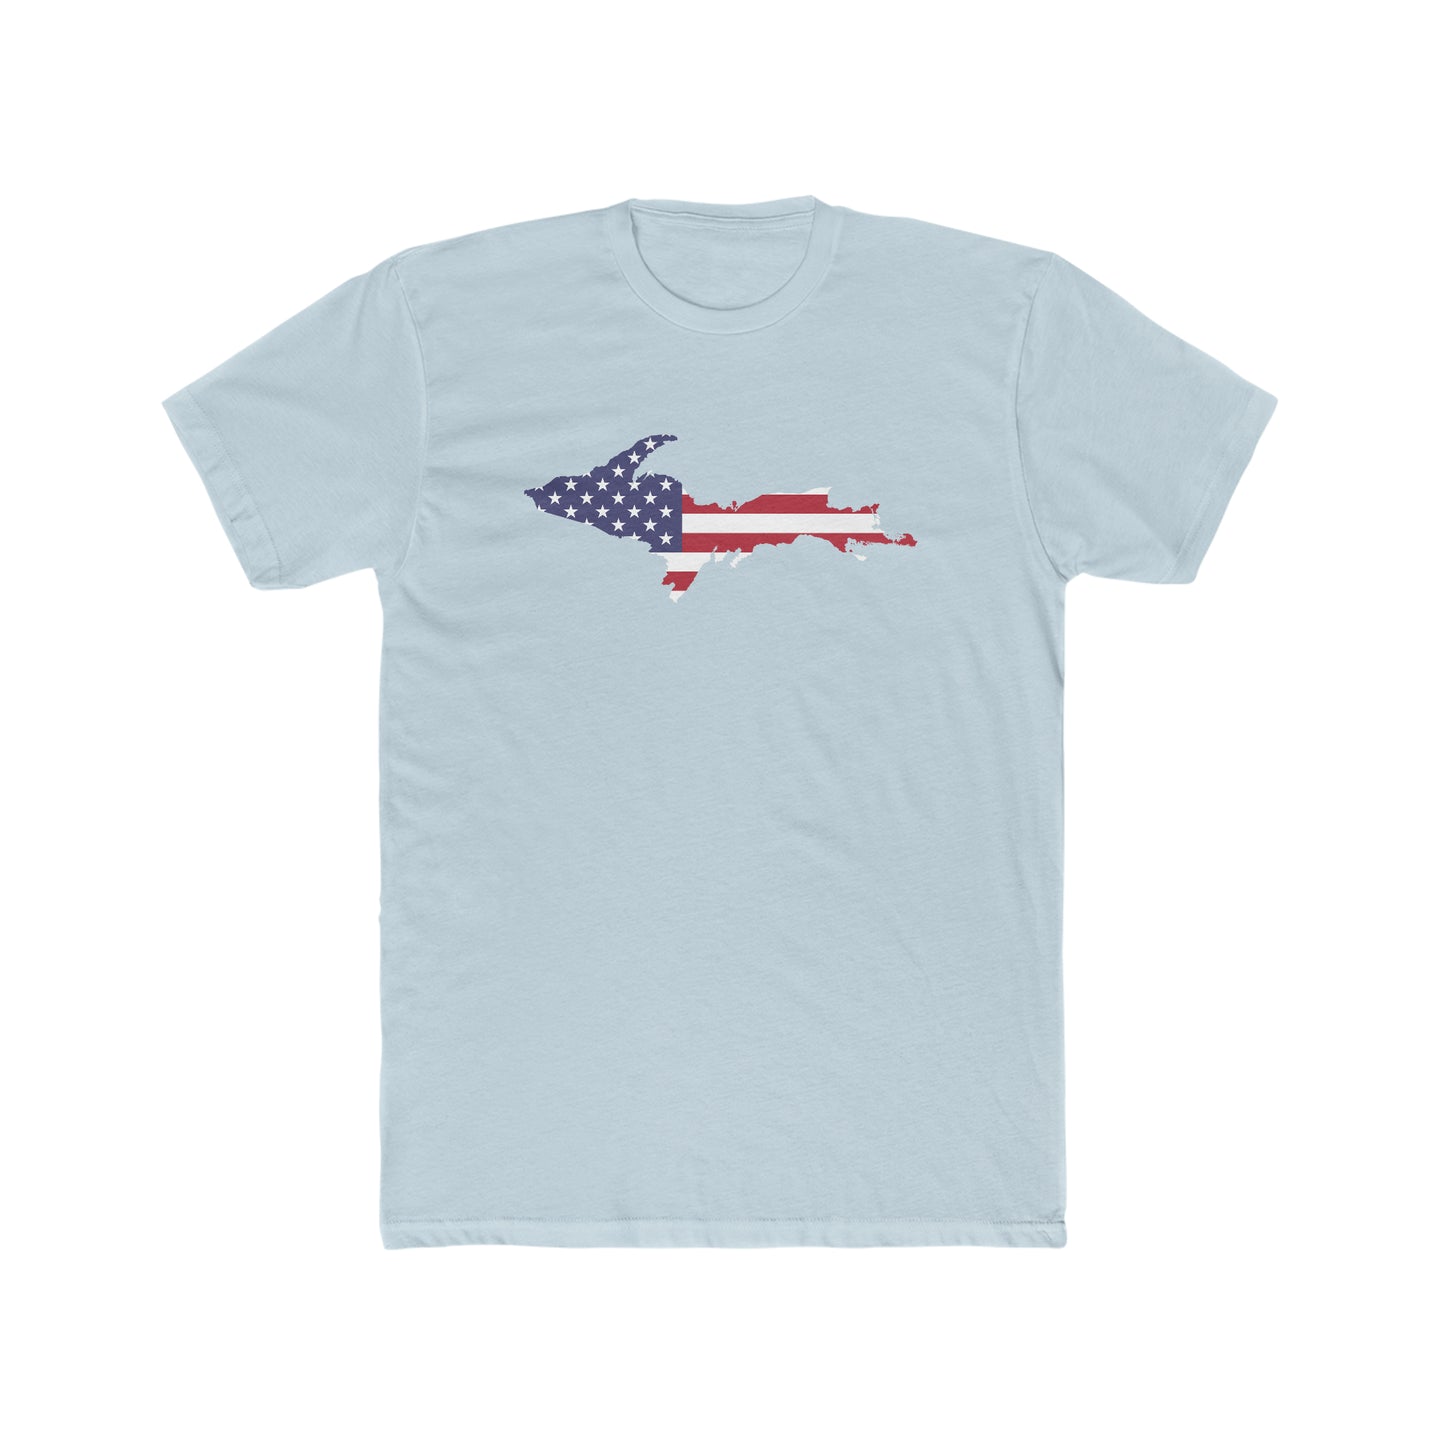 Michigan Upper Peninsula T-Shirt (w/ UP USA Flag Outline) | Men's Fitted